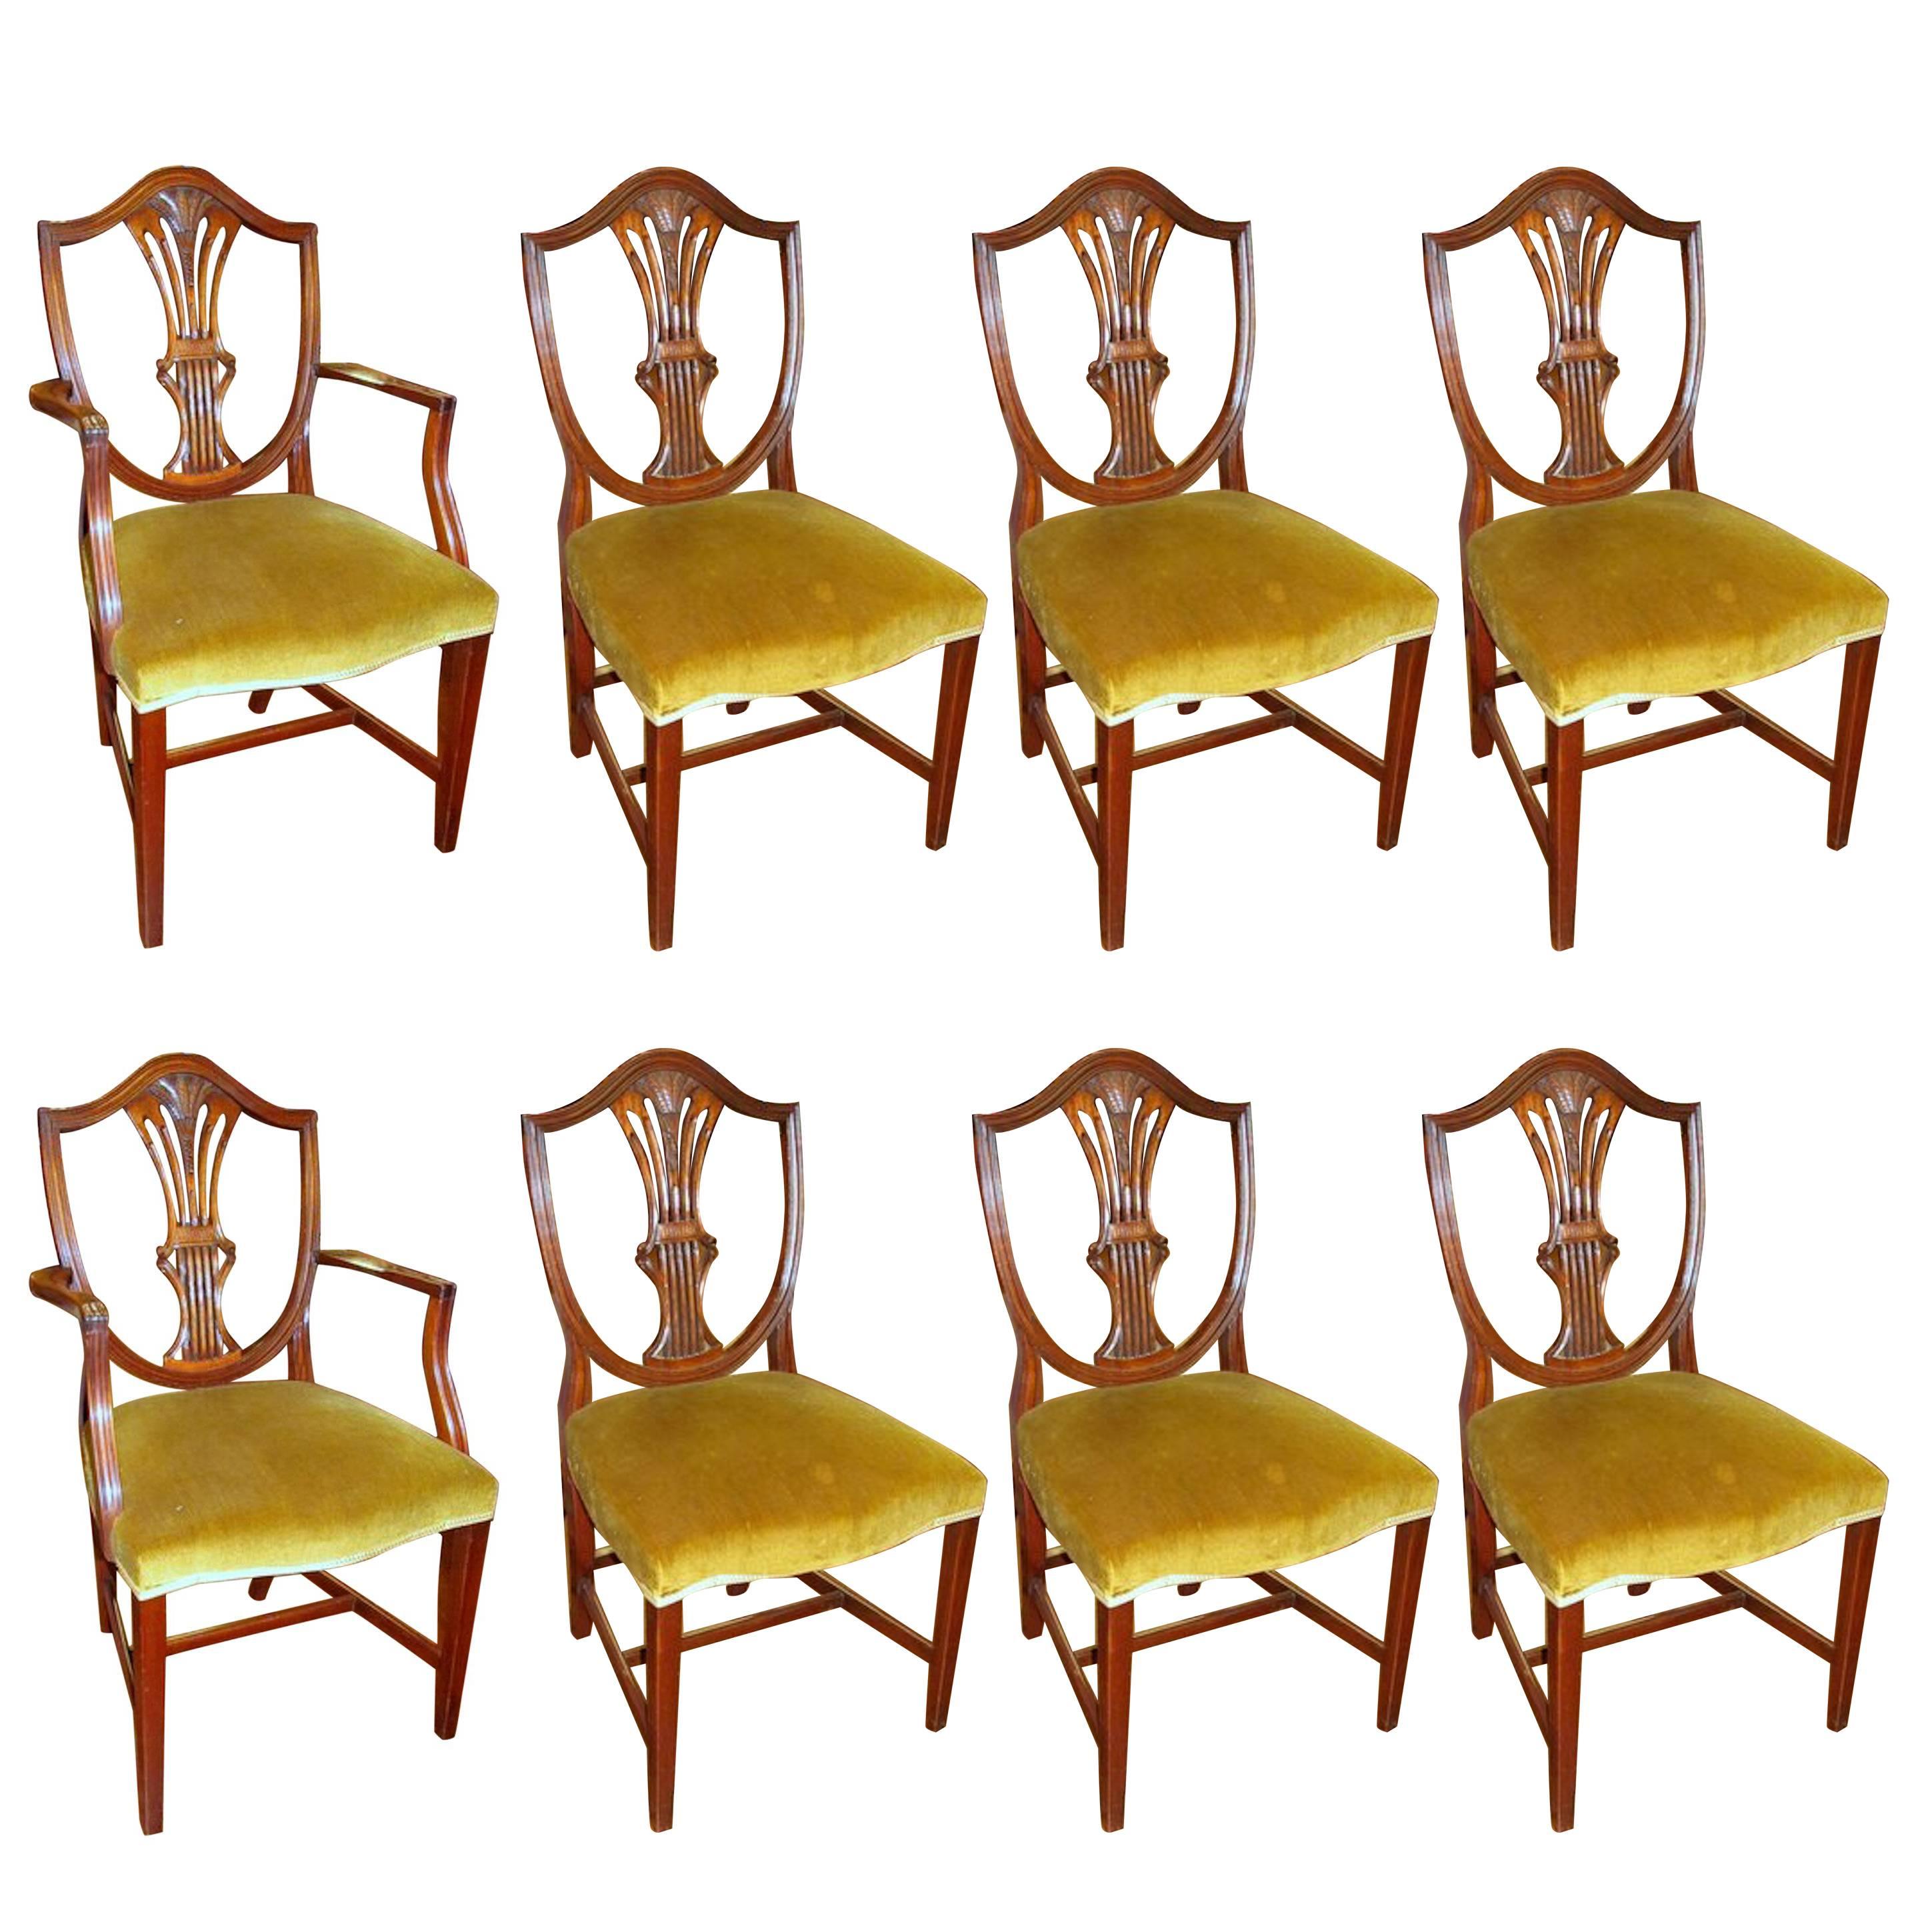 Set of Eight Hand-Carved Mahogany Hepplewhite Style Shieldback Dining Chairs